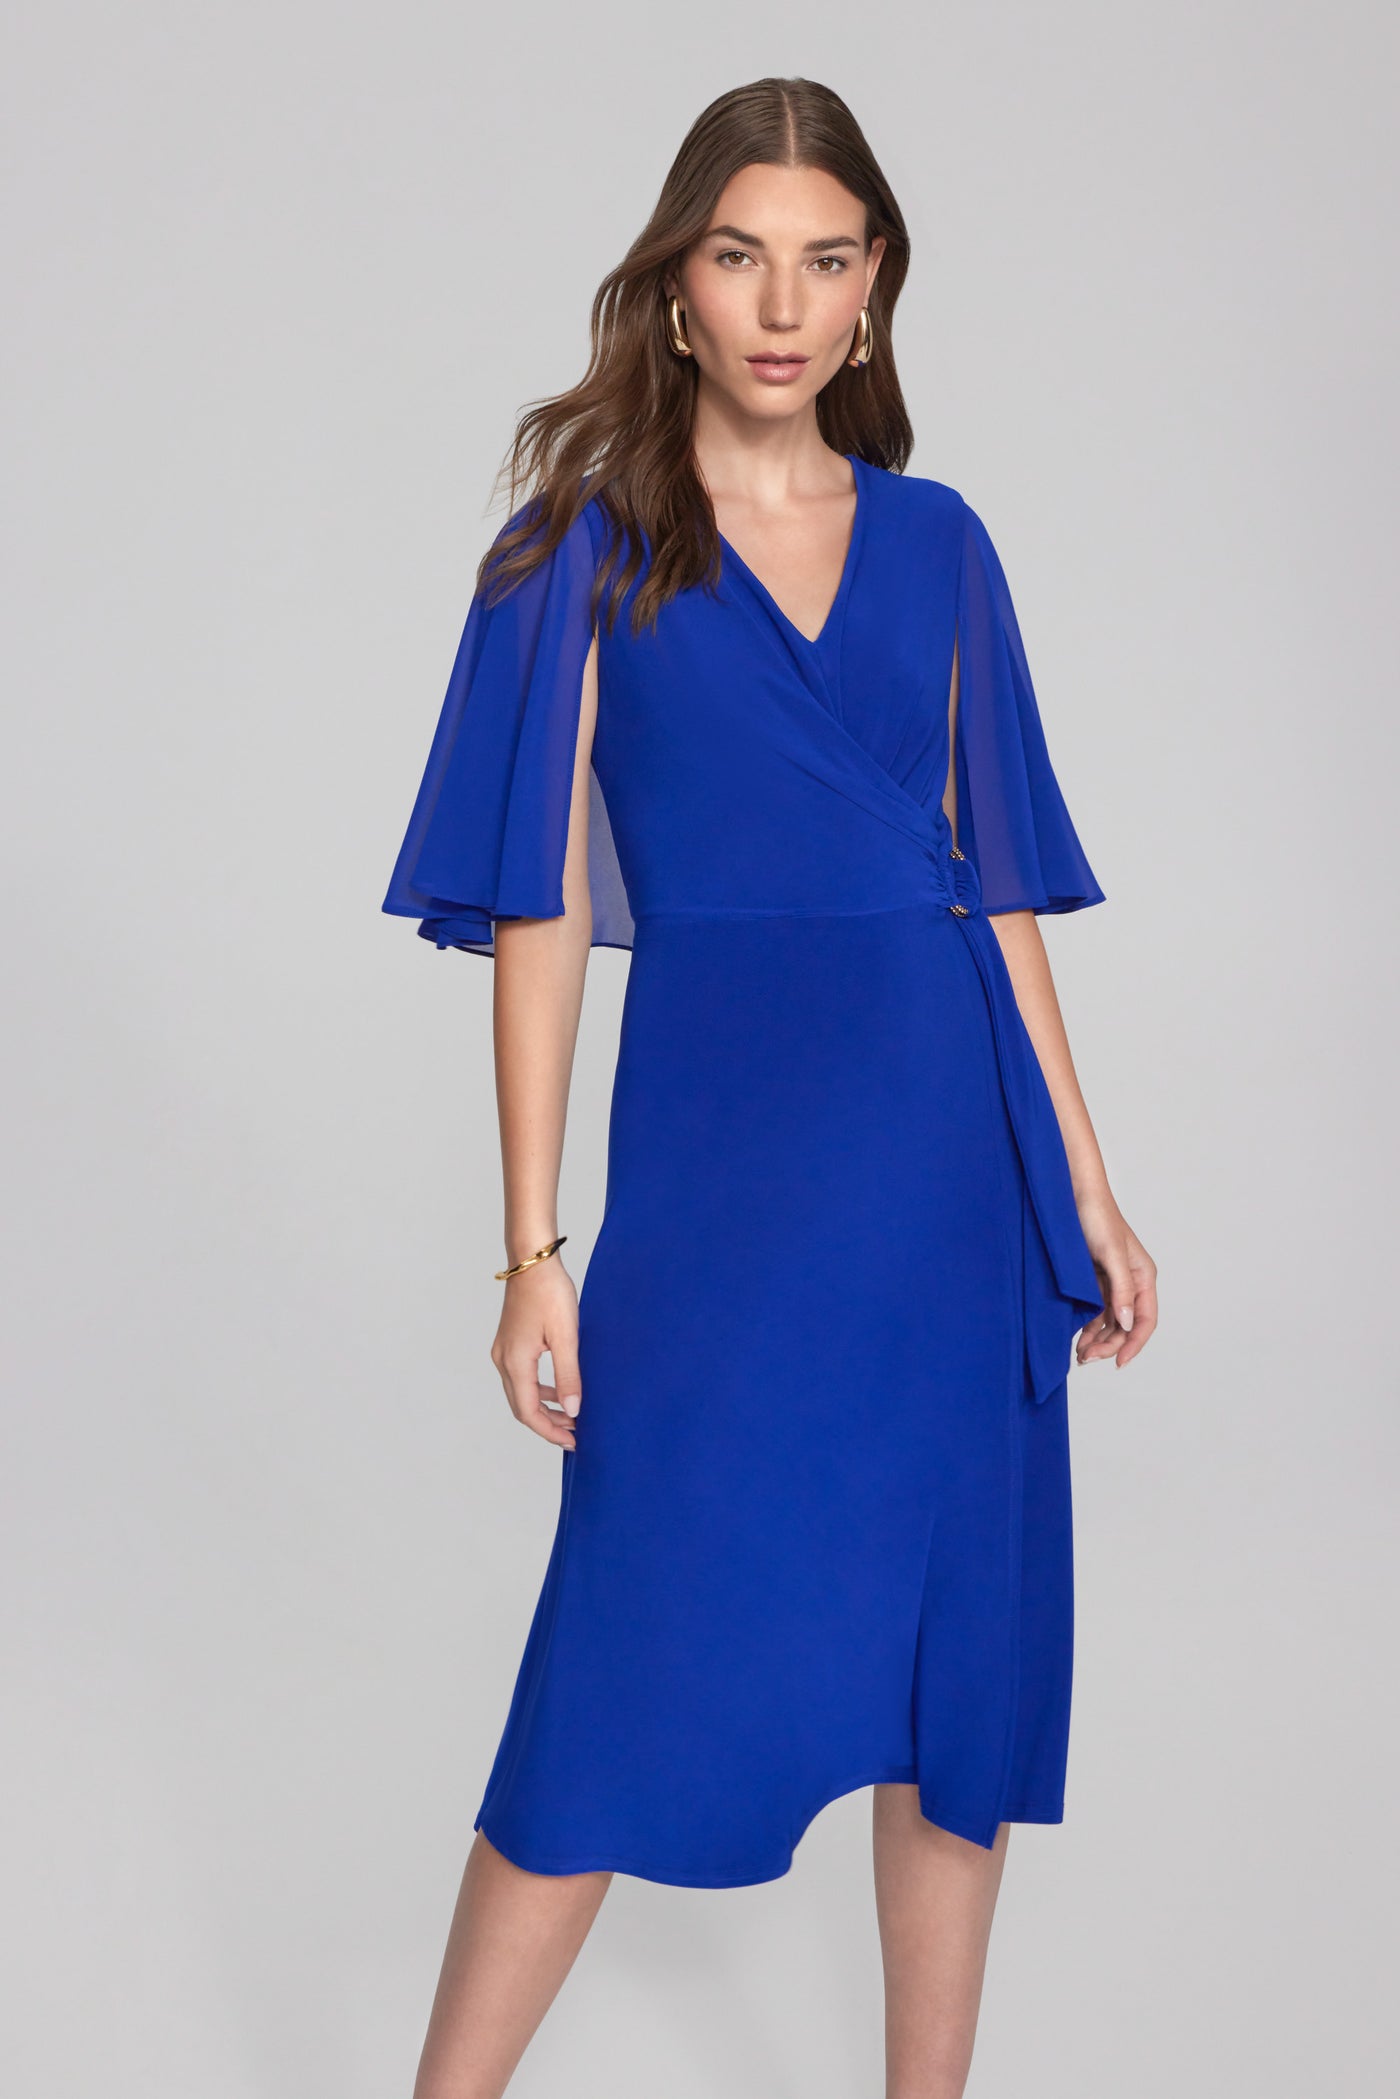 Joseph Ribkoff Royal Saphire Silky Knit Fit And Flare Dress